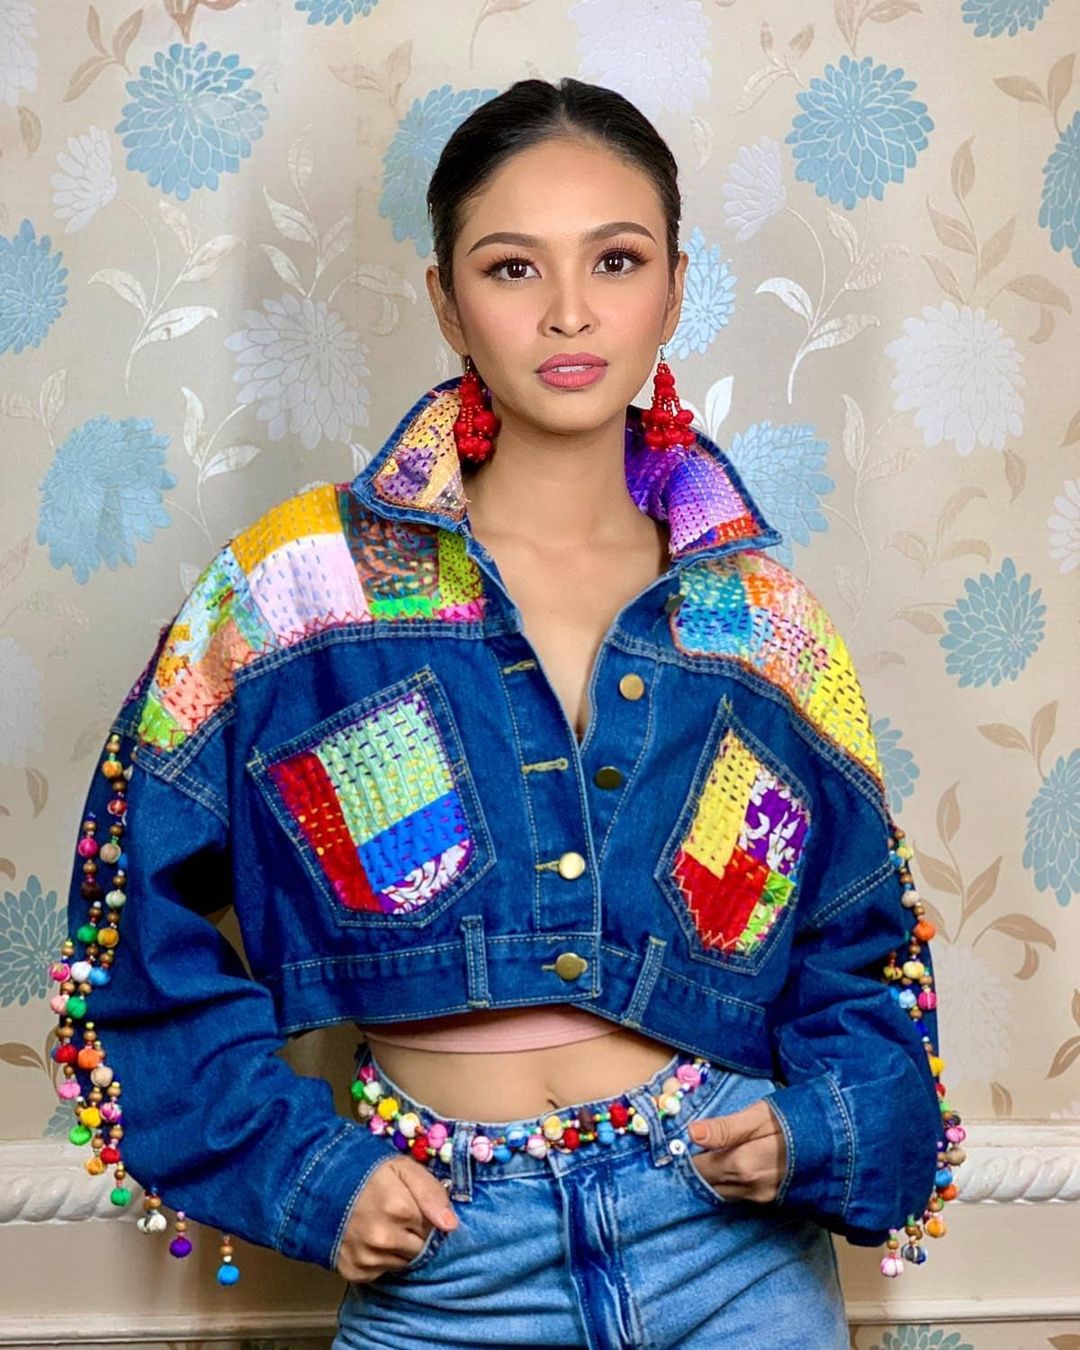 ootd poses as seen on miss universe philippines 2021 candidates